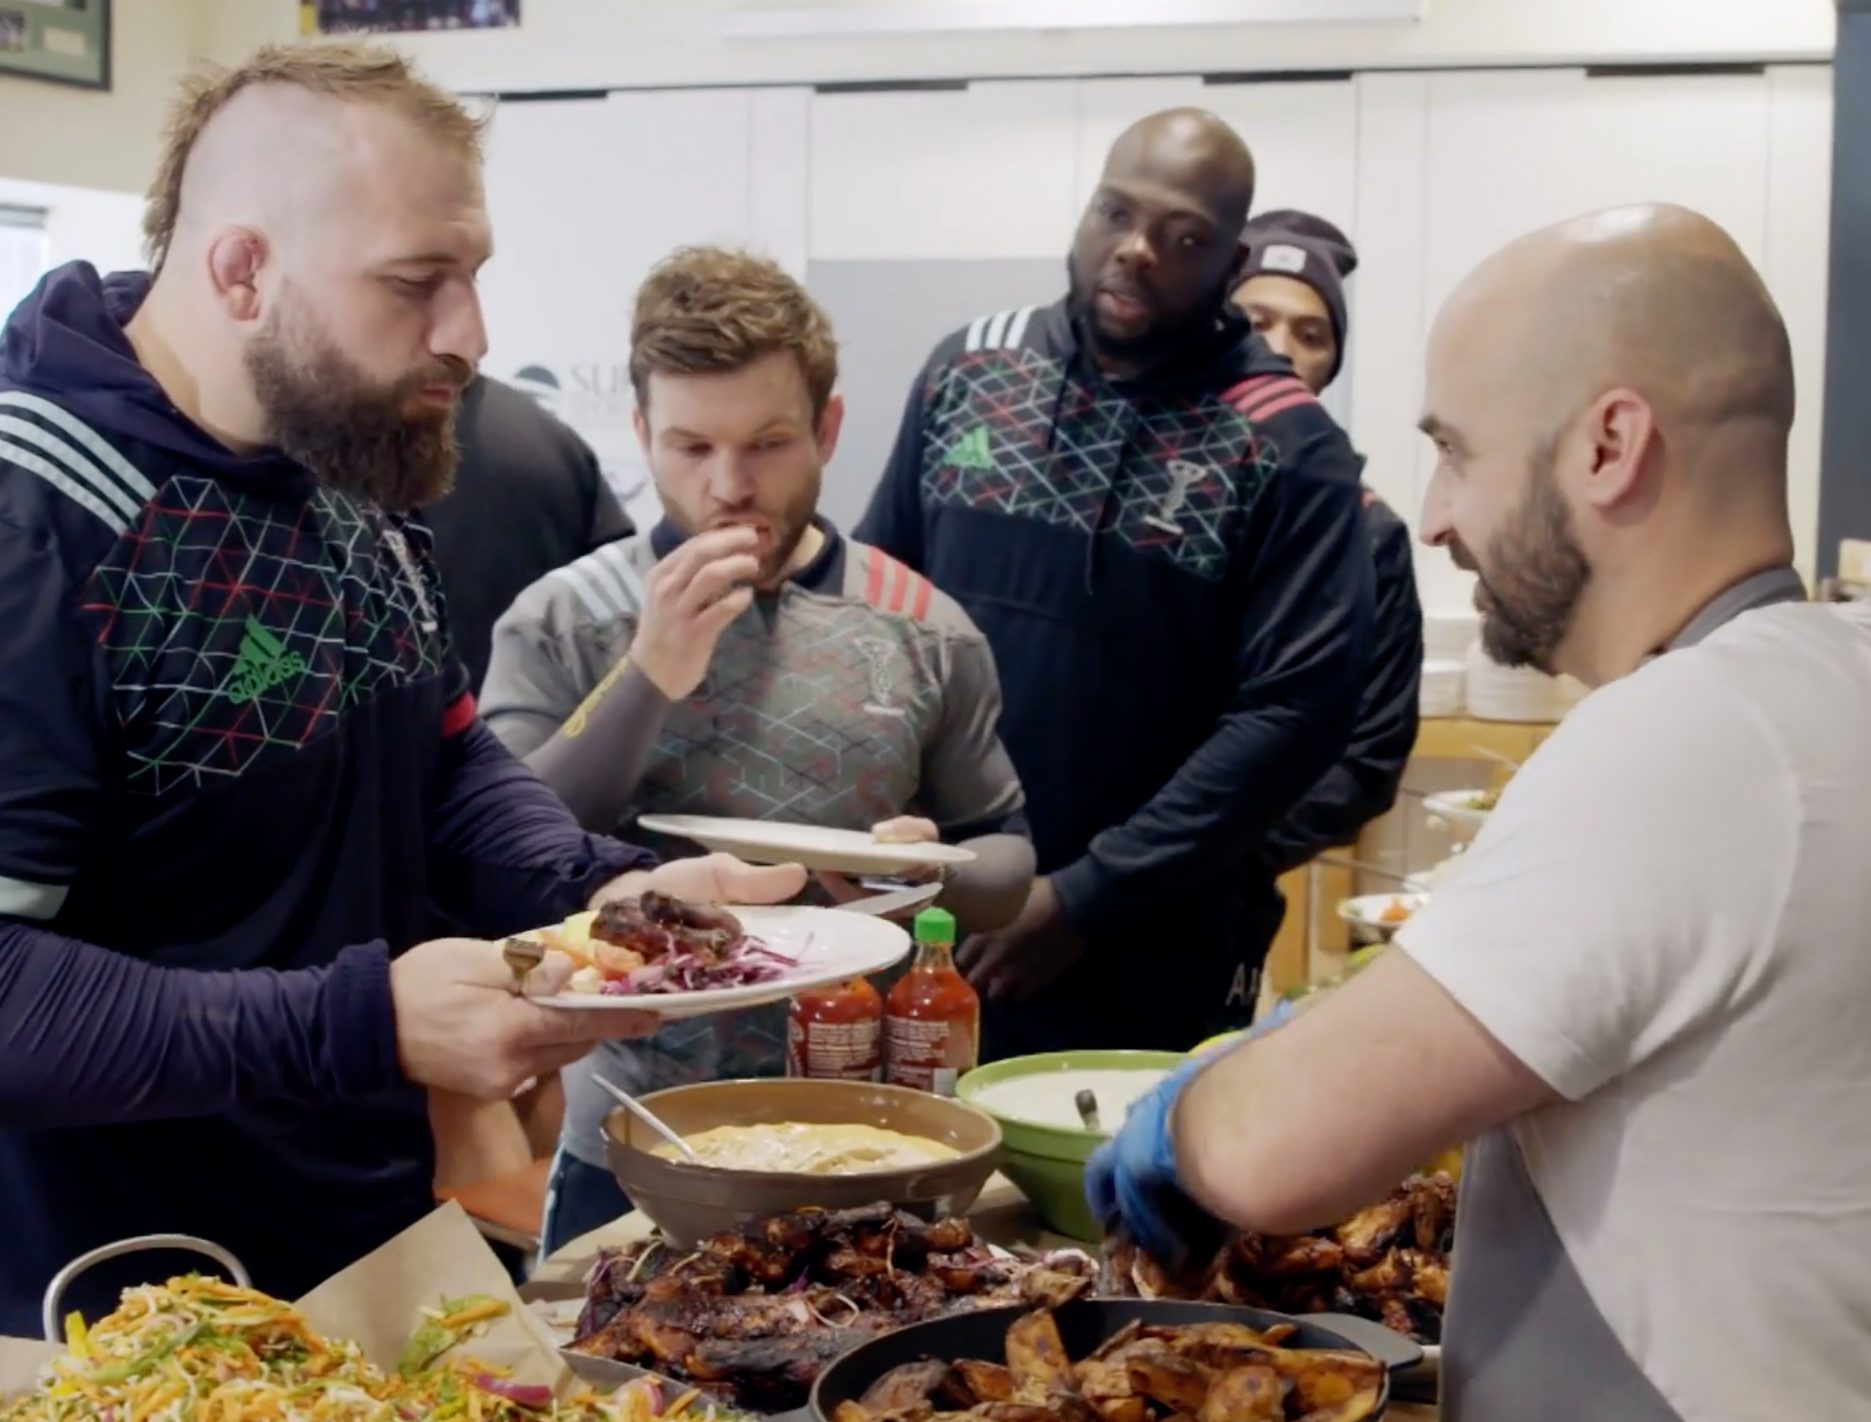 Meziane dishes up his food to Harlequins rugby player Joe Marler